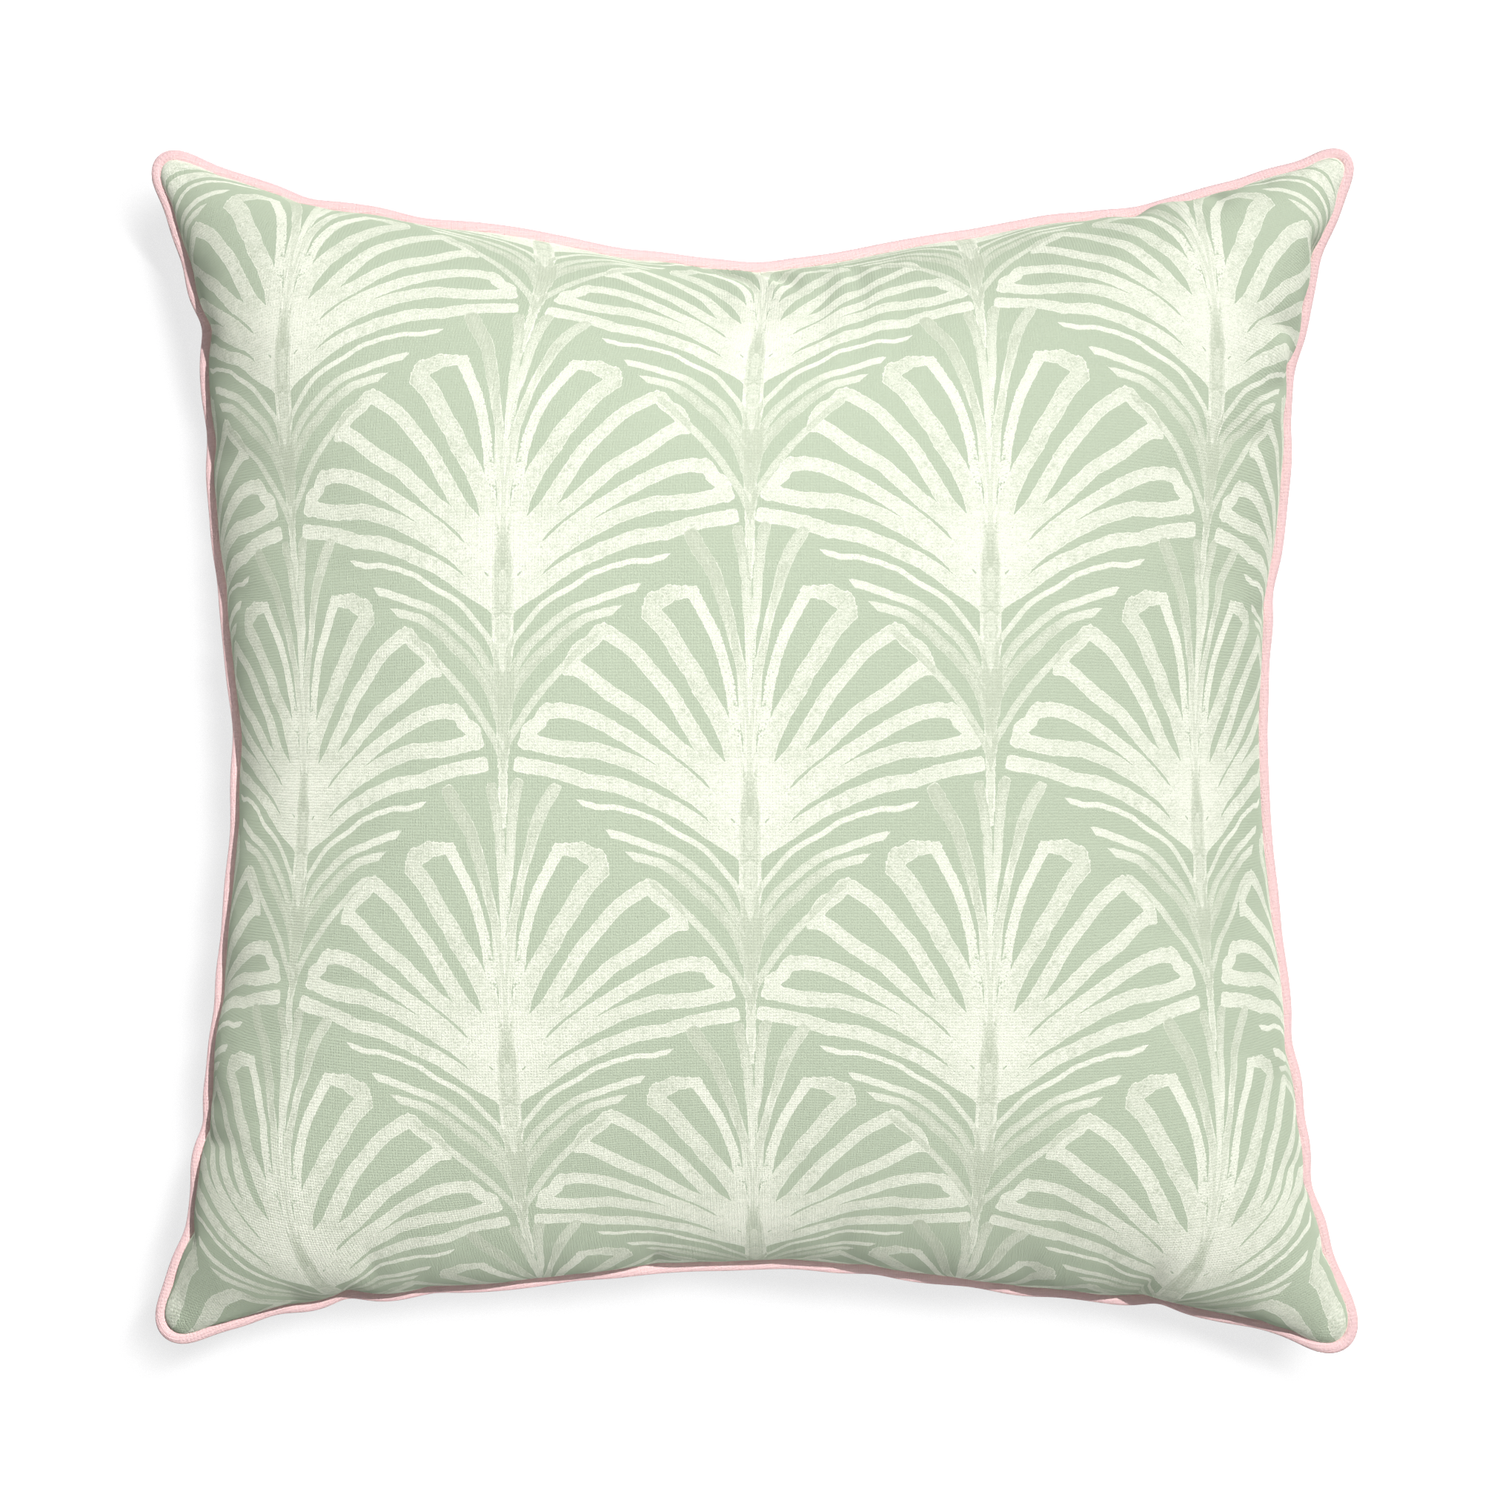 Euro-sham suzy sage custom pillow with petal piping on white background